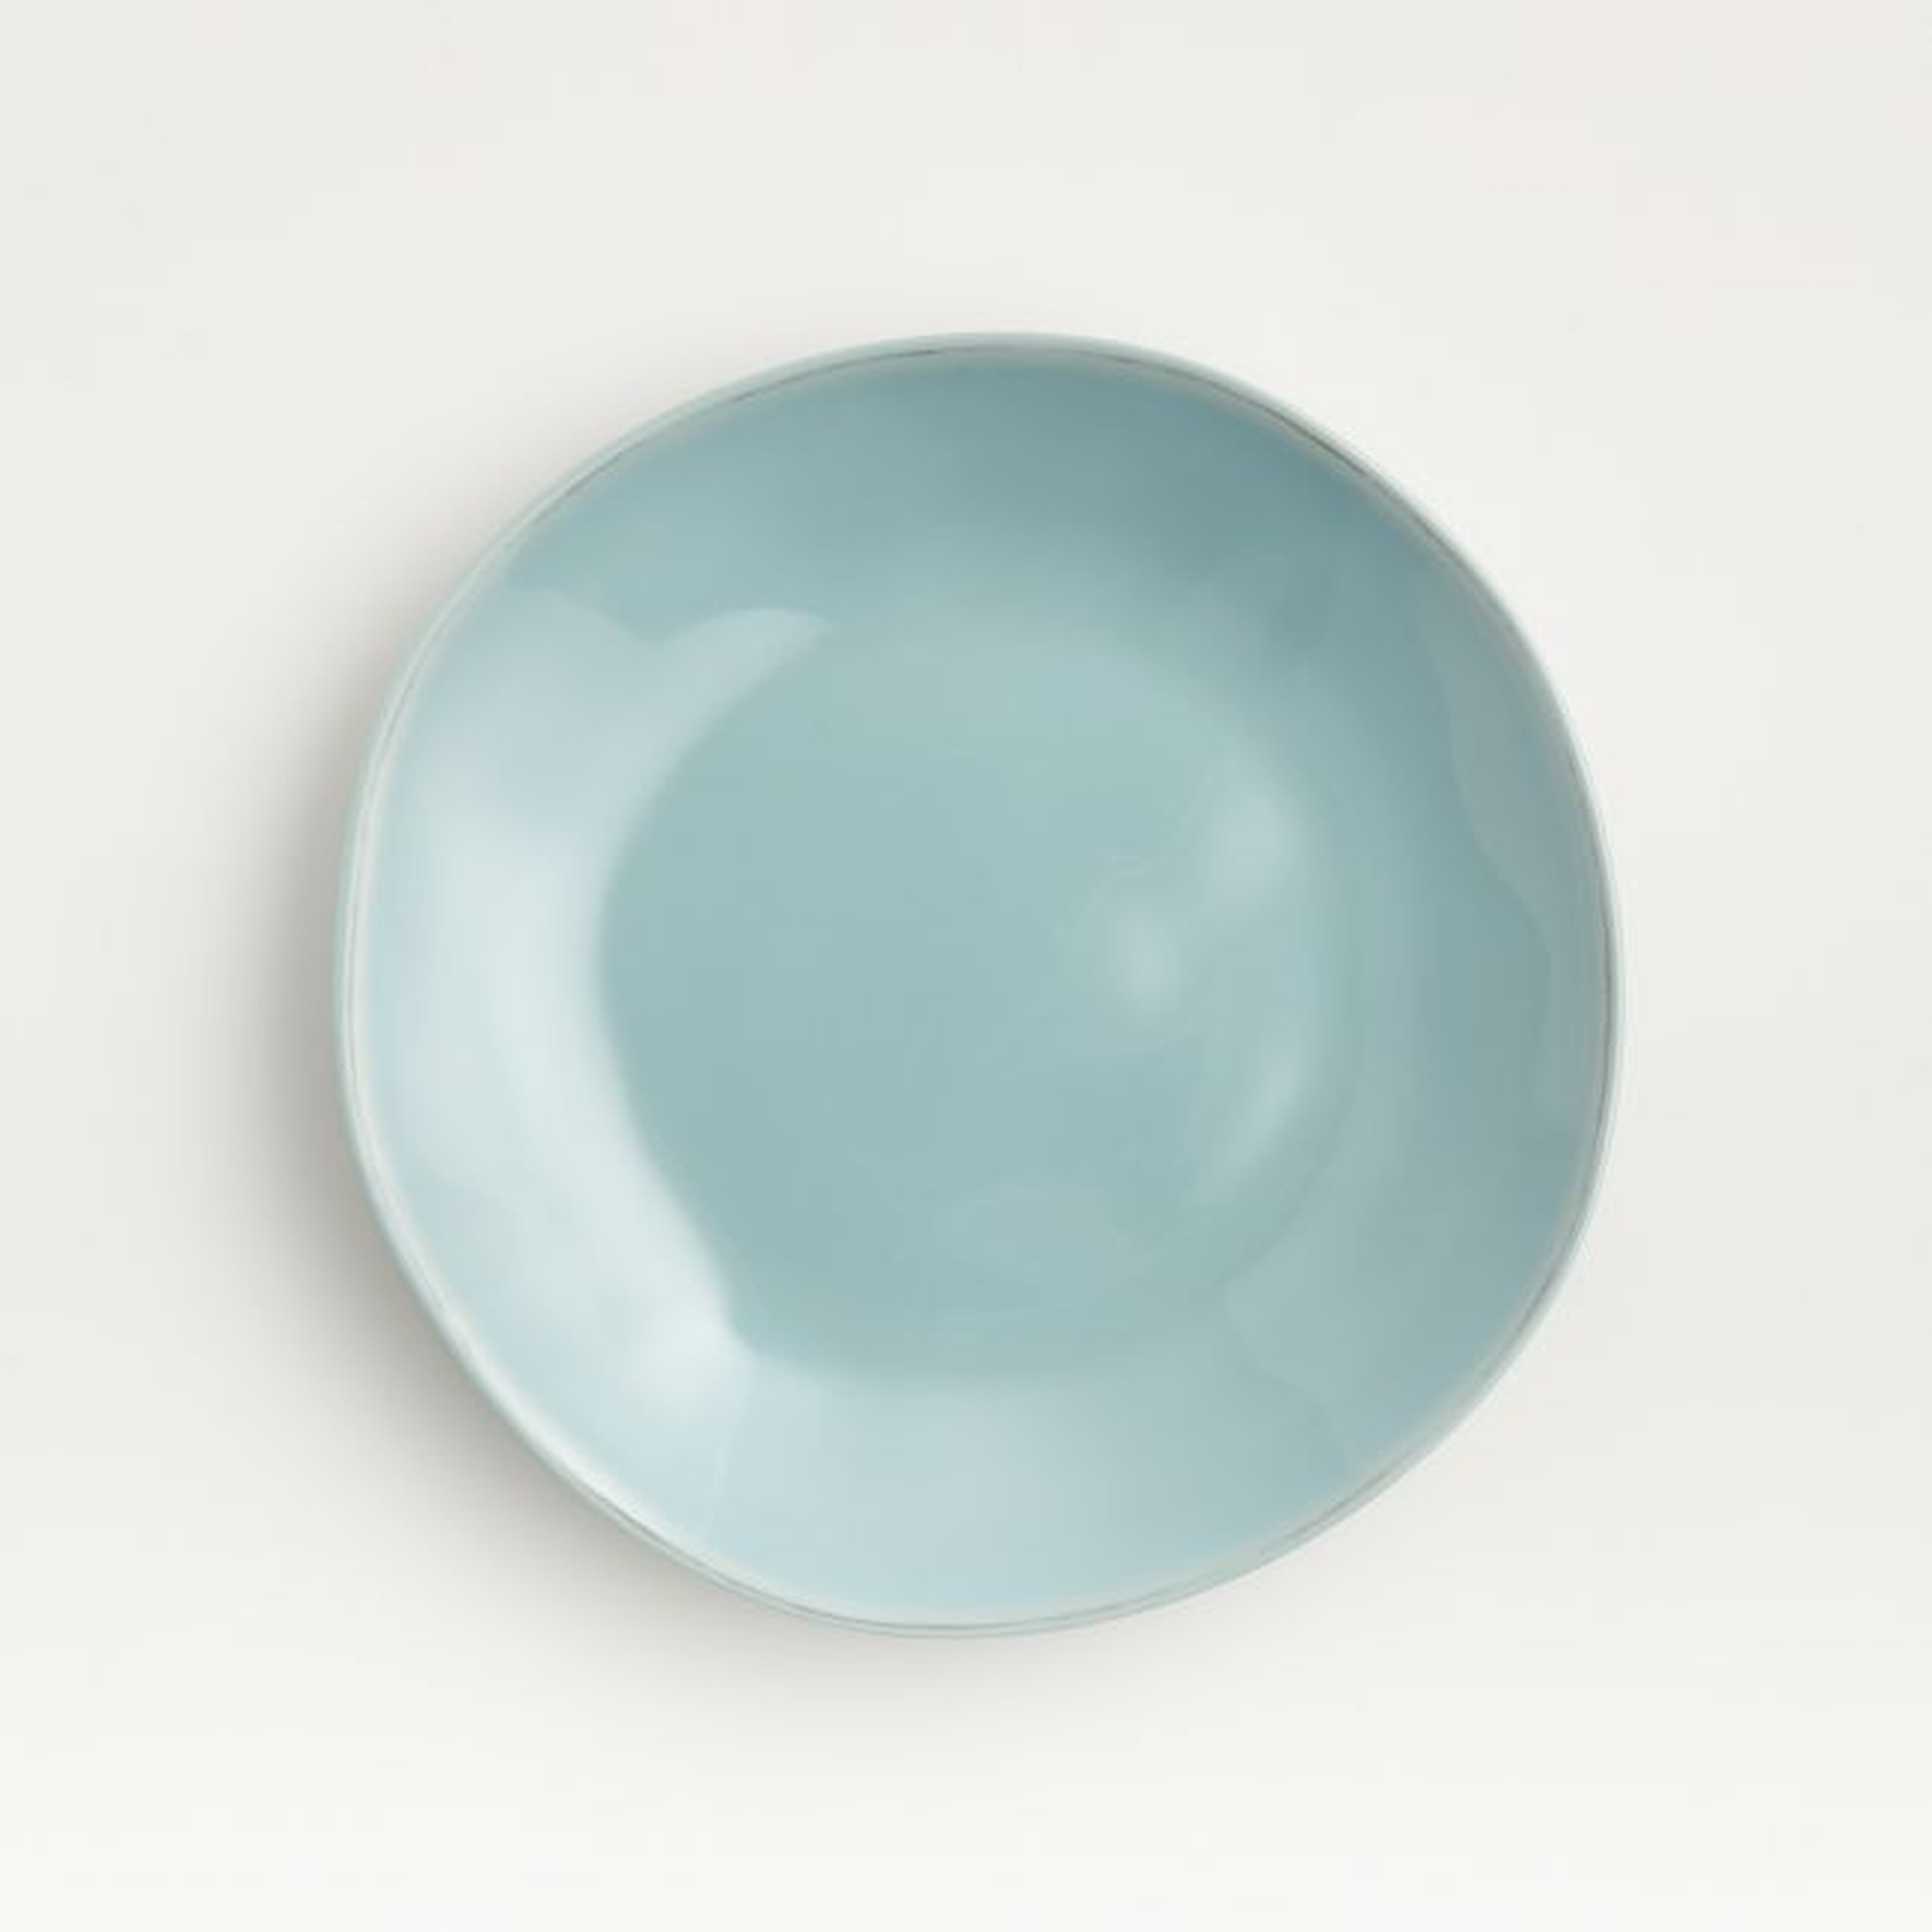 Marin Blue Outdoor Melamine Salad Plate - Crate and Barrel